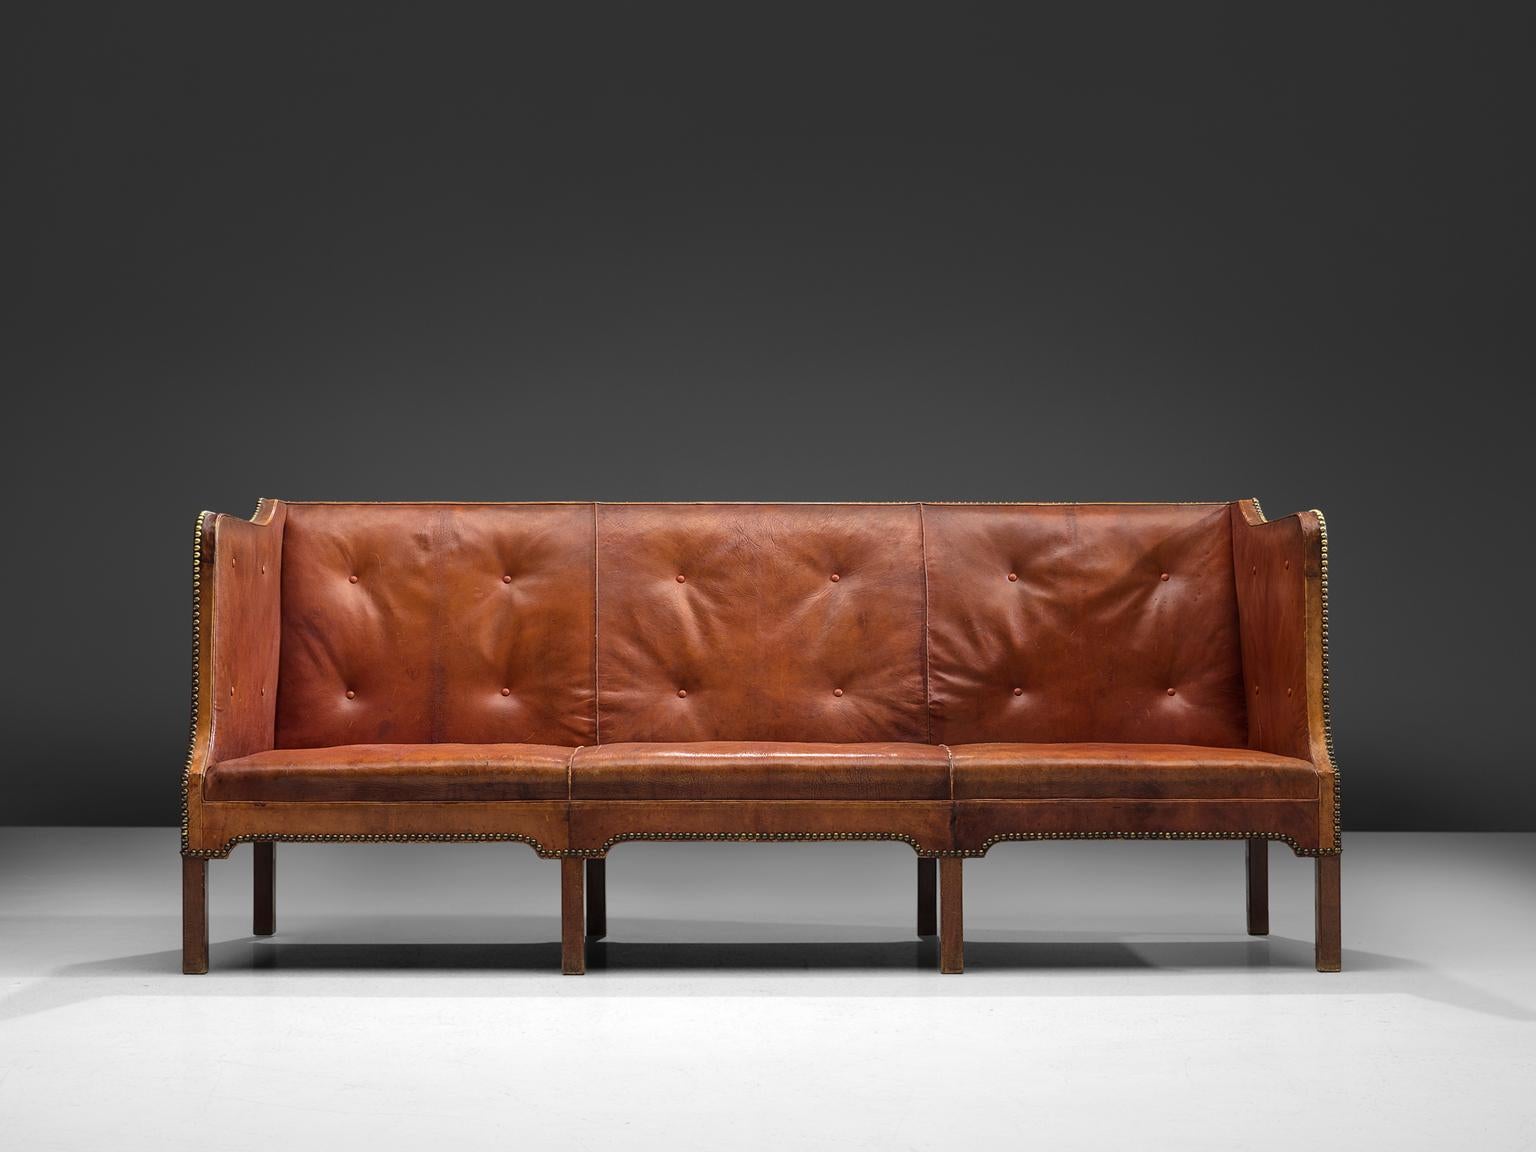 Kaare Klint, variation on sofa model 4118, cognac leather and Cuban mahogany, late 1920s, Denmark.

Classic and elegant Scandinavian custom made three-seat sofa by Kaare Klint for Erik Zahle, the late director of the Danish Design museum from 1949